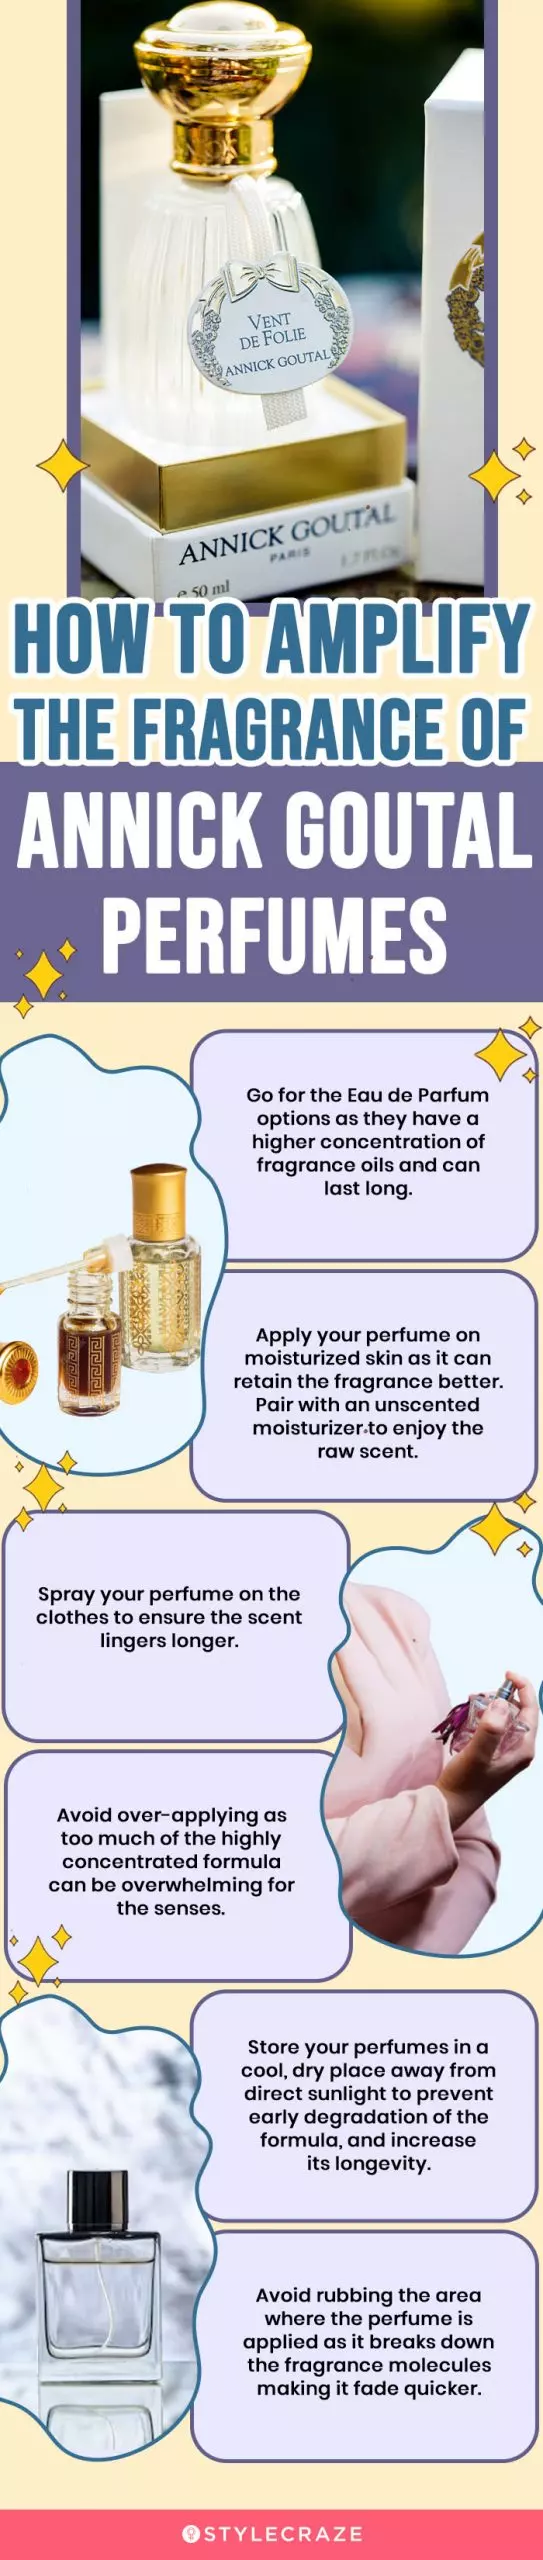 How To Amplify The Fragrance Of Annick Goutal Perfumes (infographic)